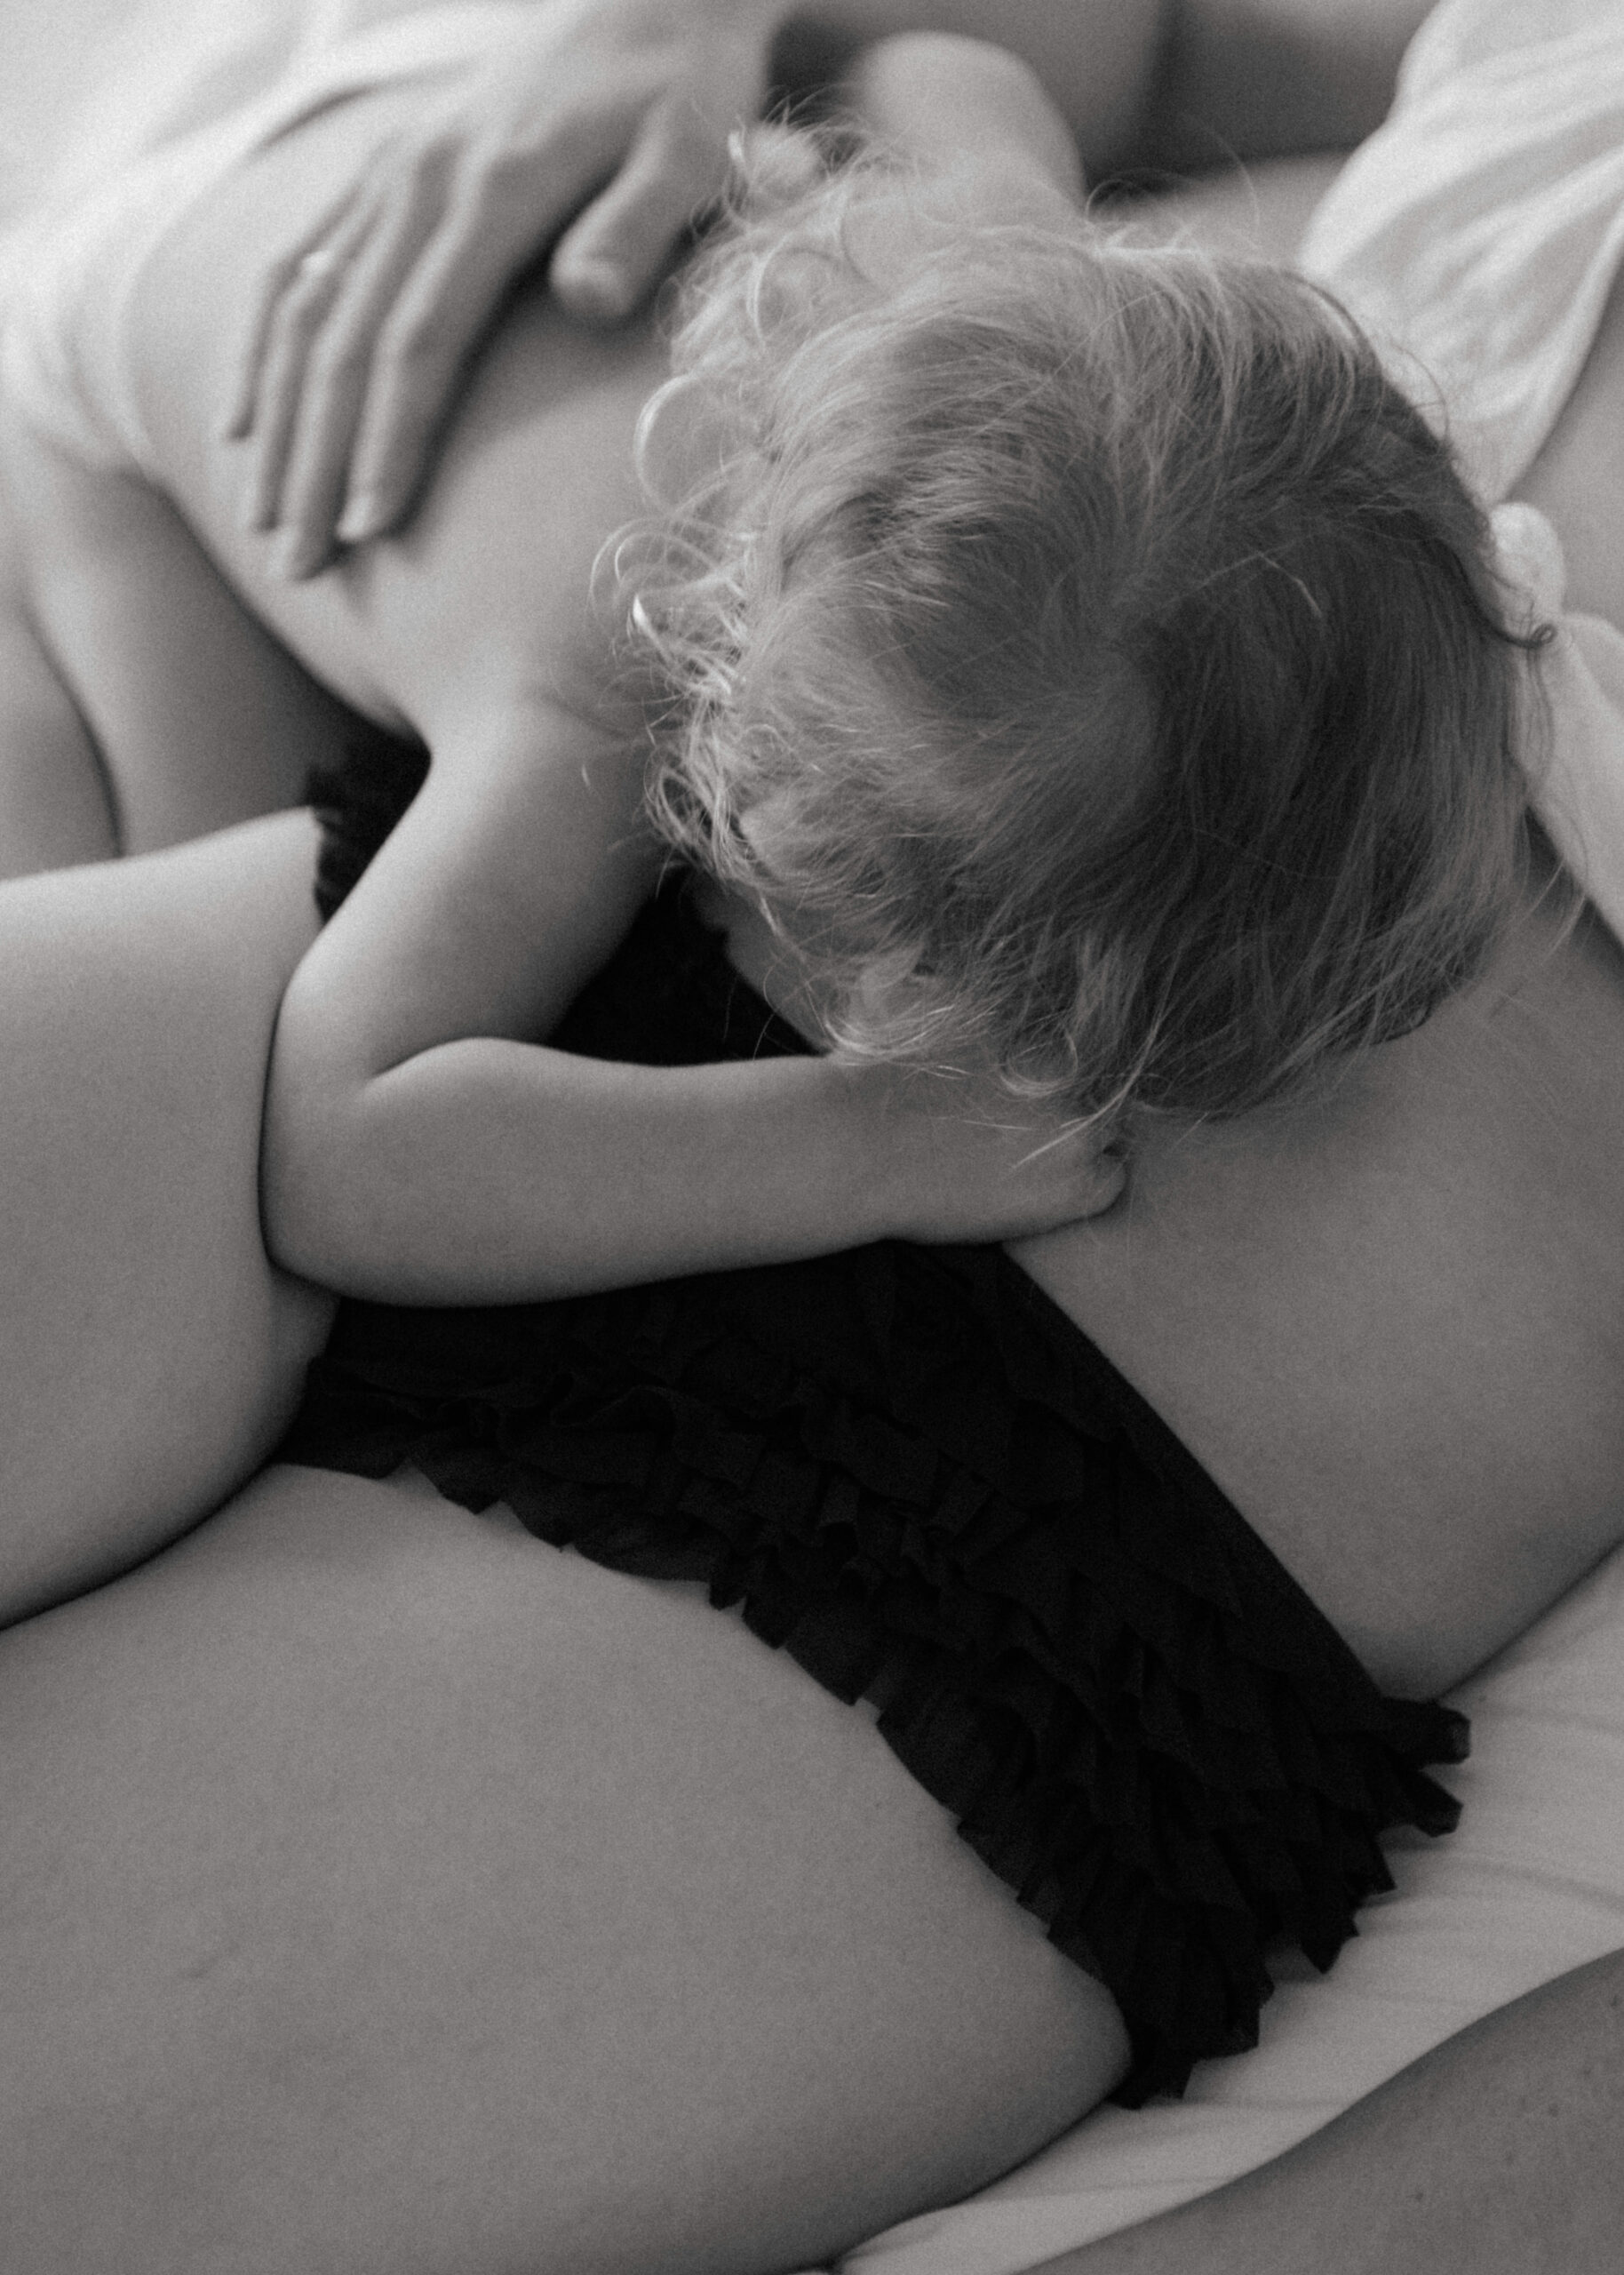 baby putting her head on mother's stomach during breastfeeding photography session